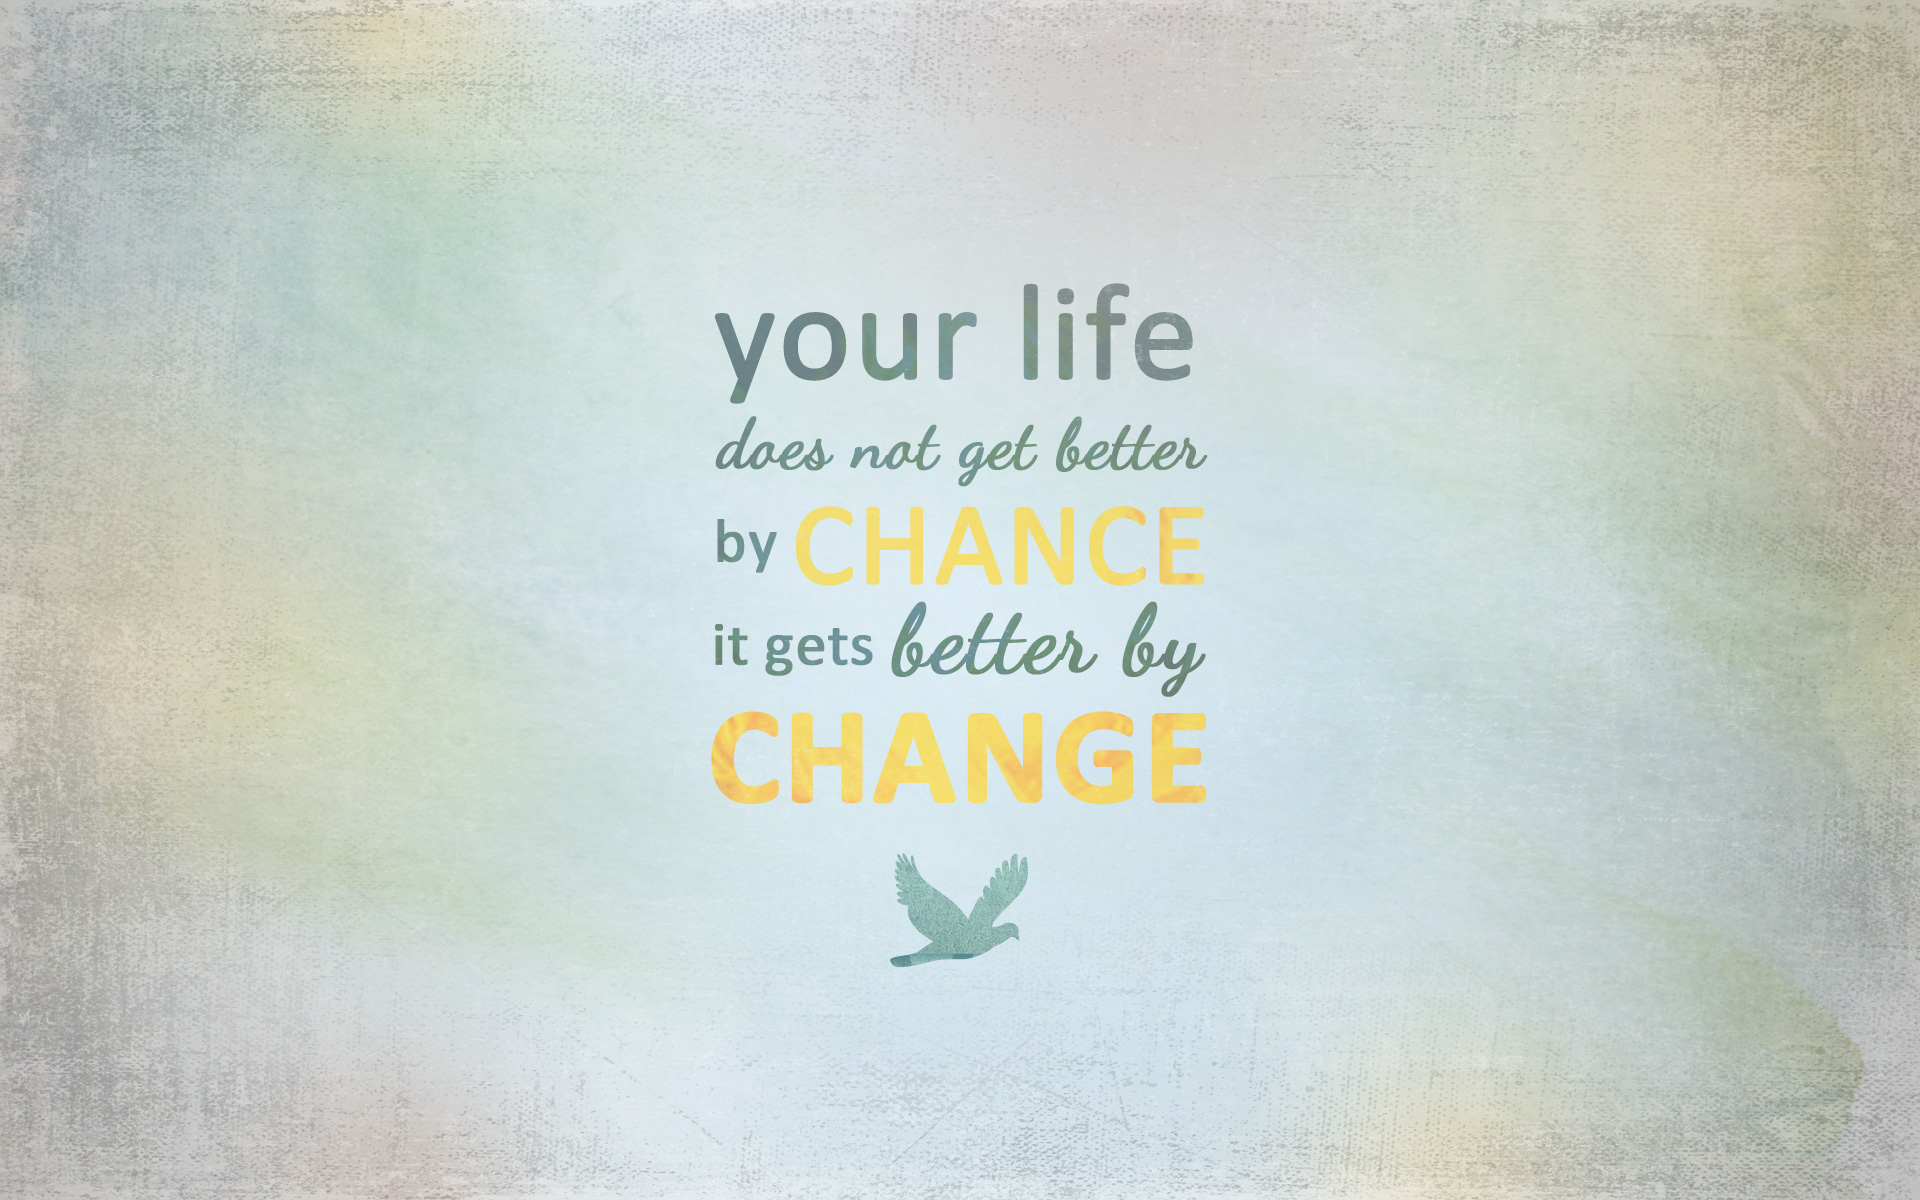 Inspirational quotes - Your life does not get better by chance it gets better by change